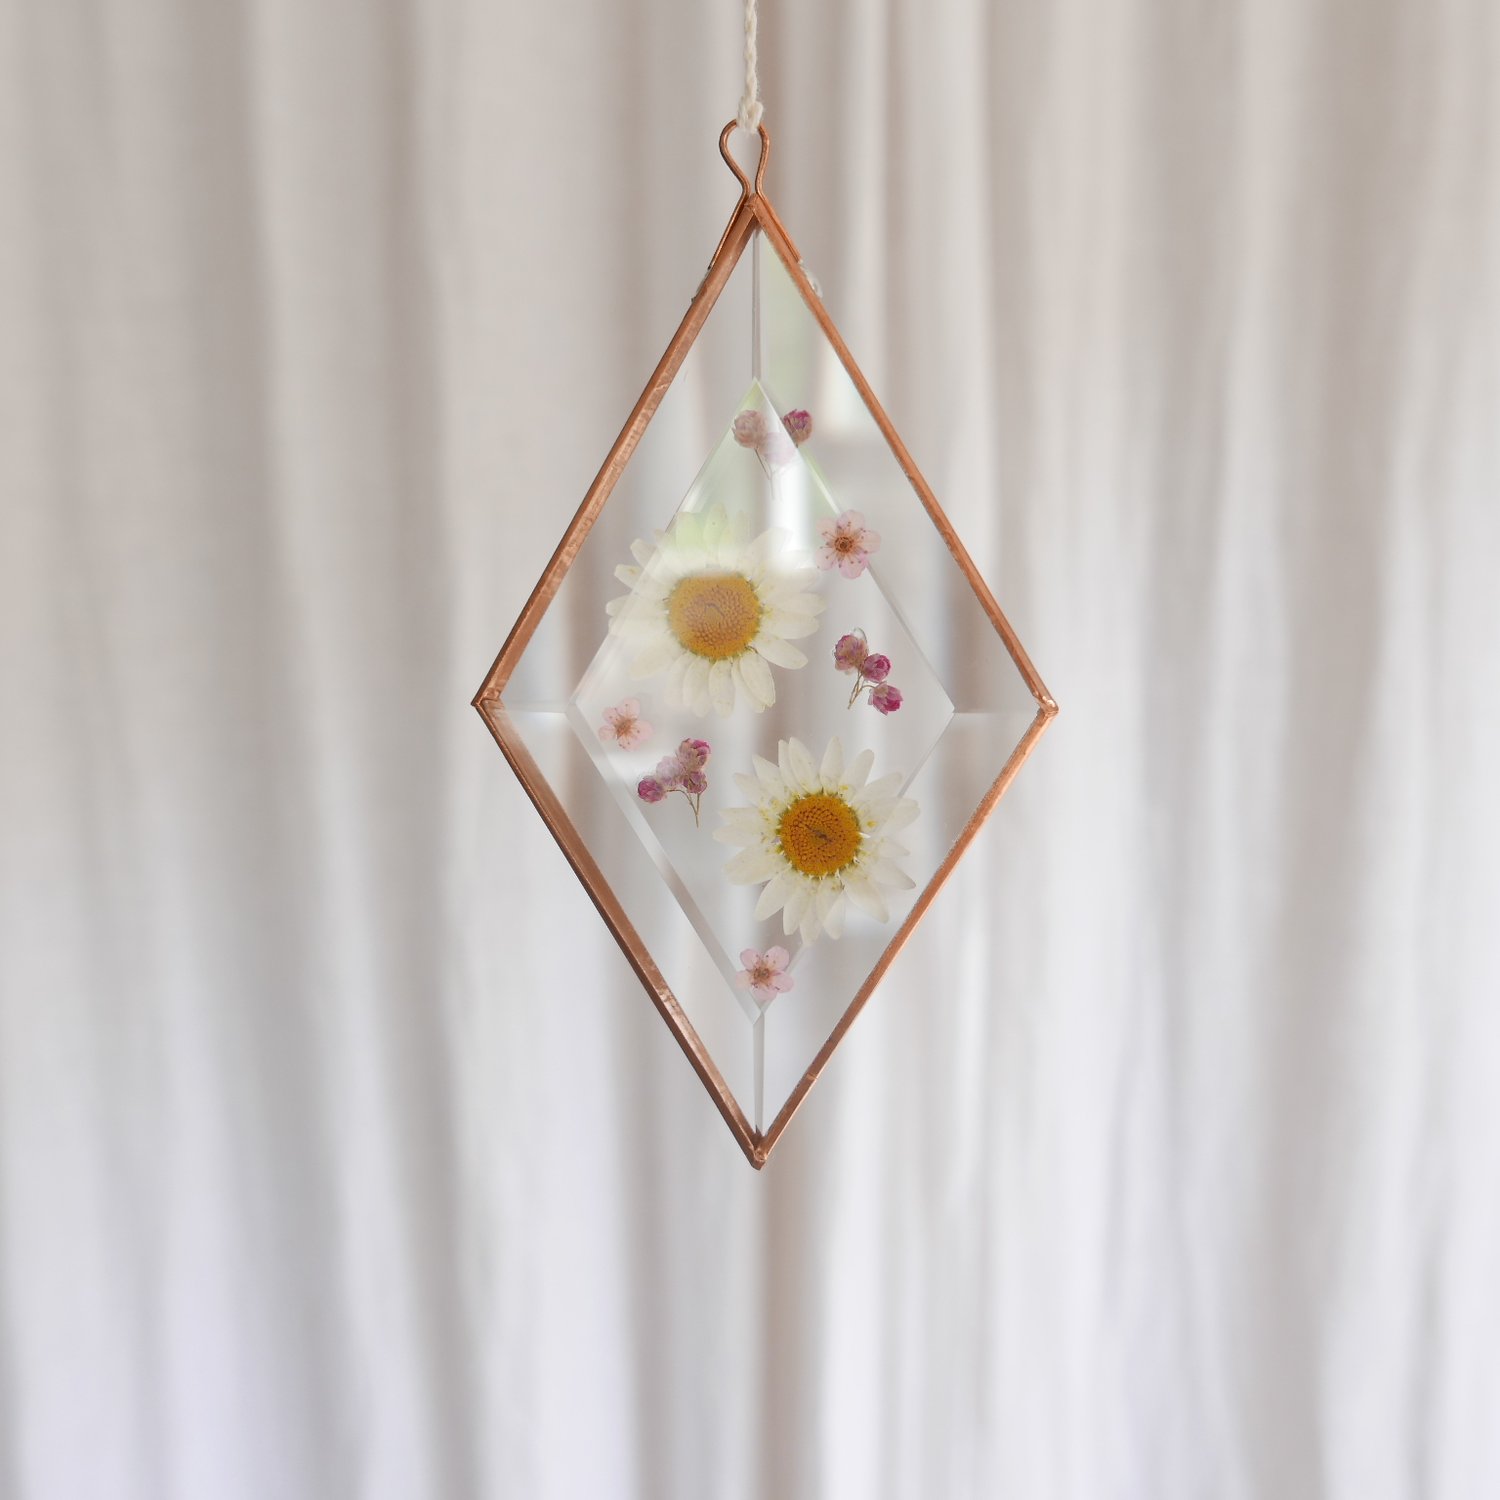 Image of Pressed Flower Suncatcher - Daisies and Rice Flower